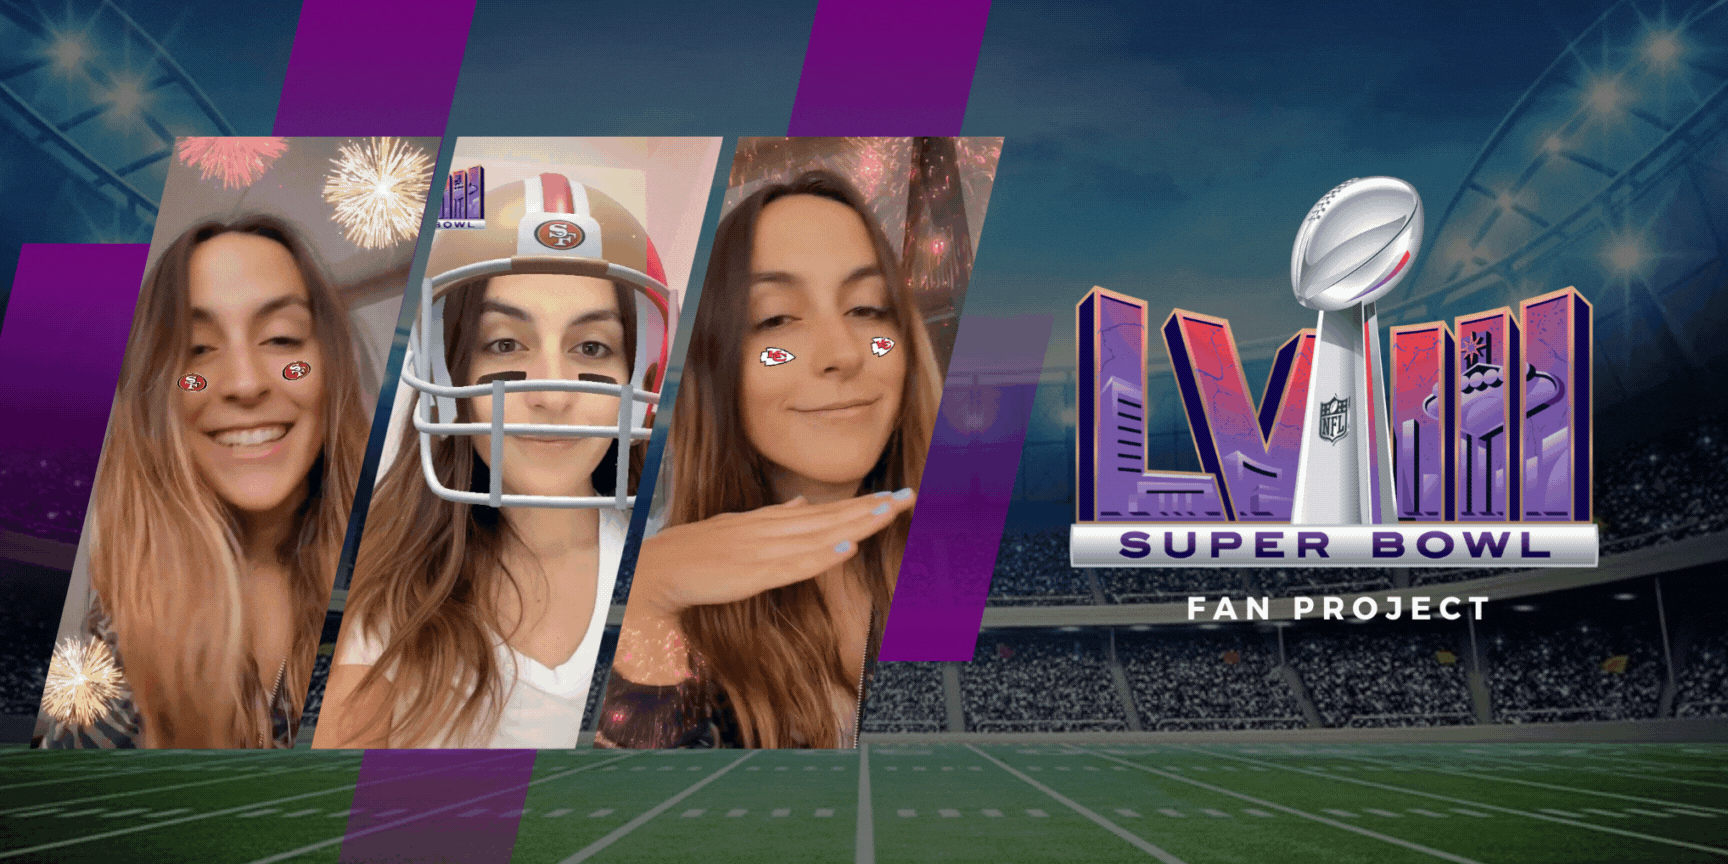 AR fan experiences for the NFL Super Bowl LVIII